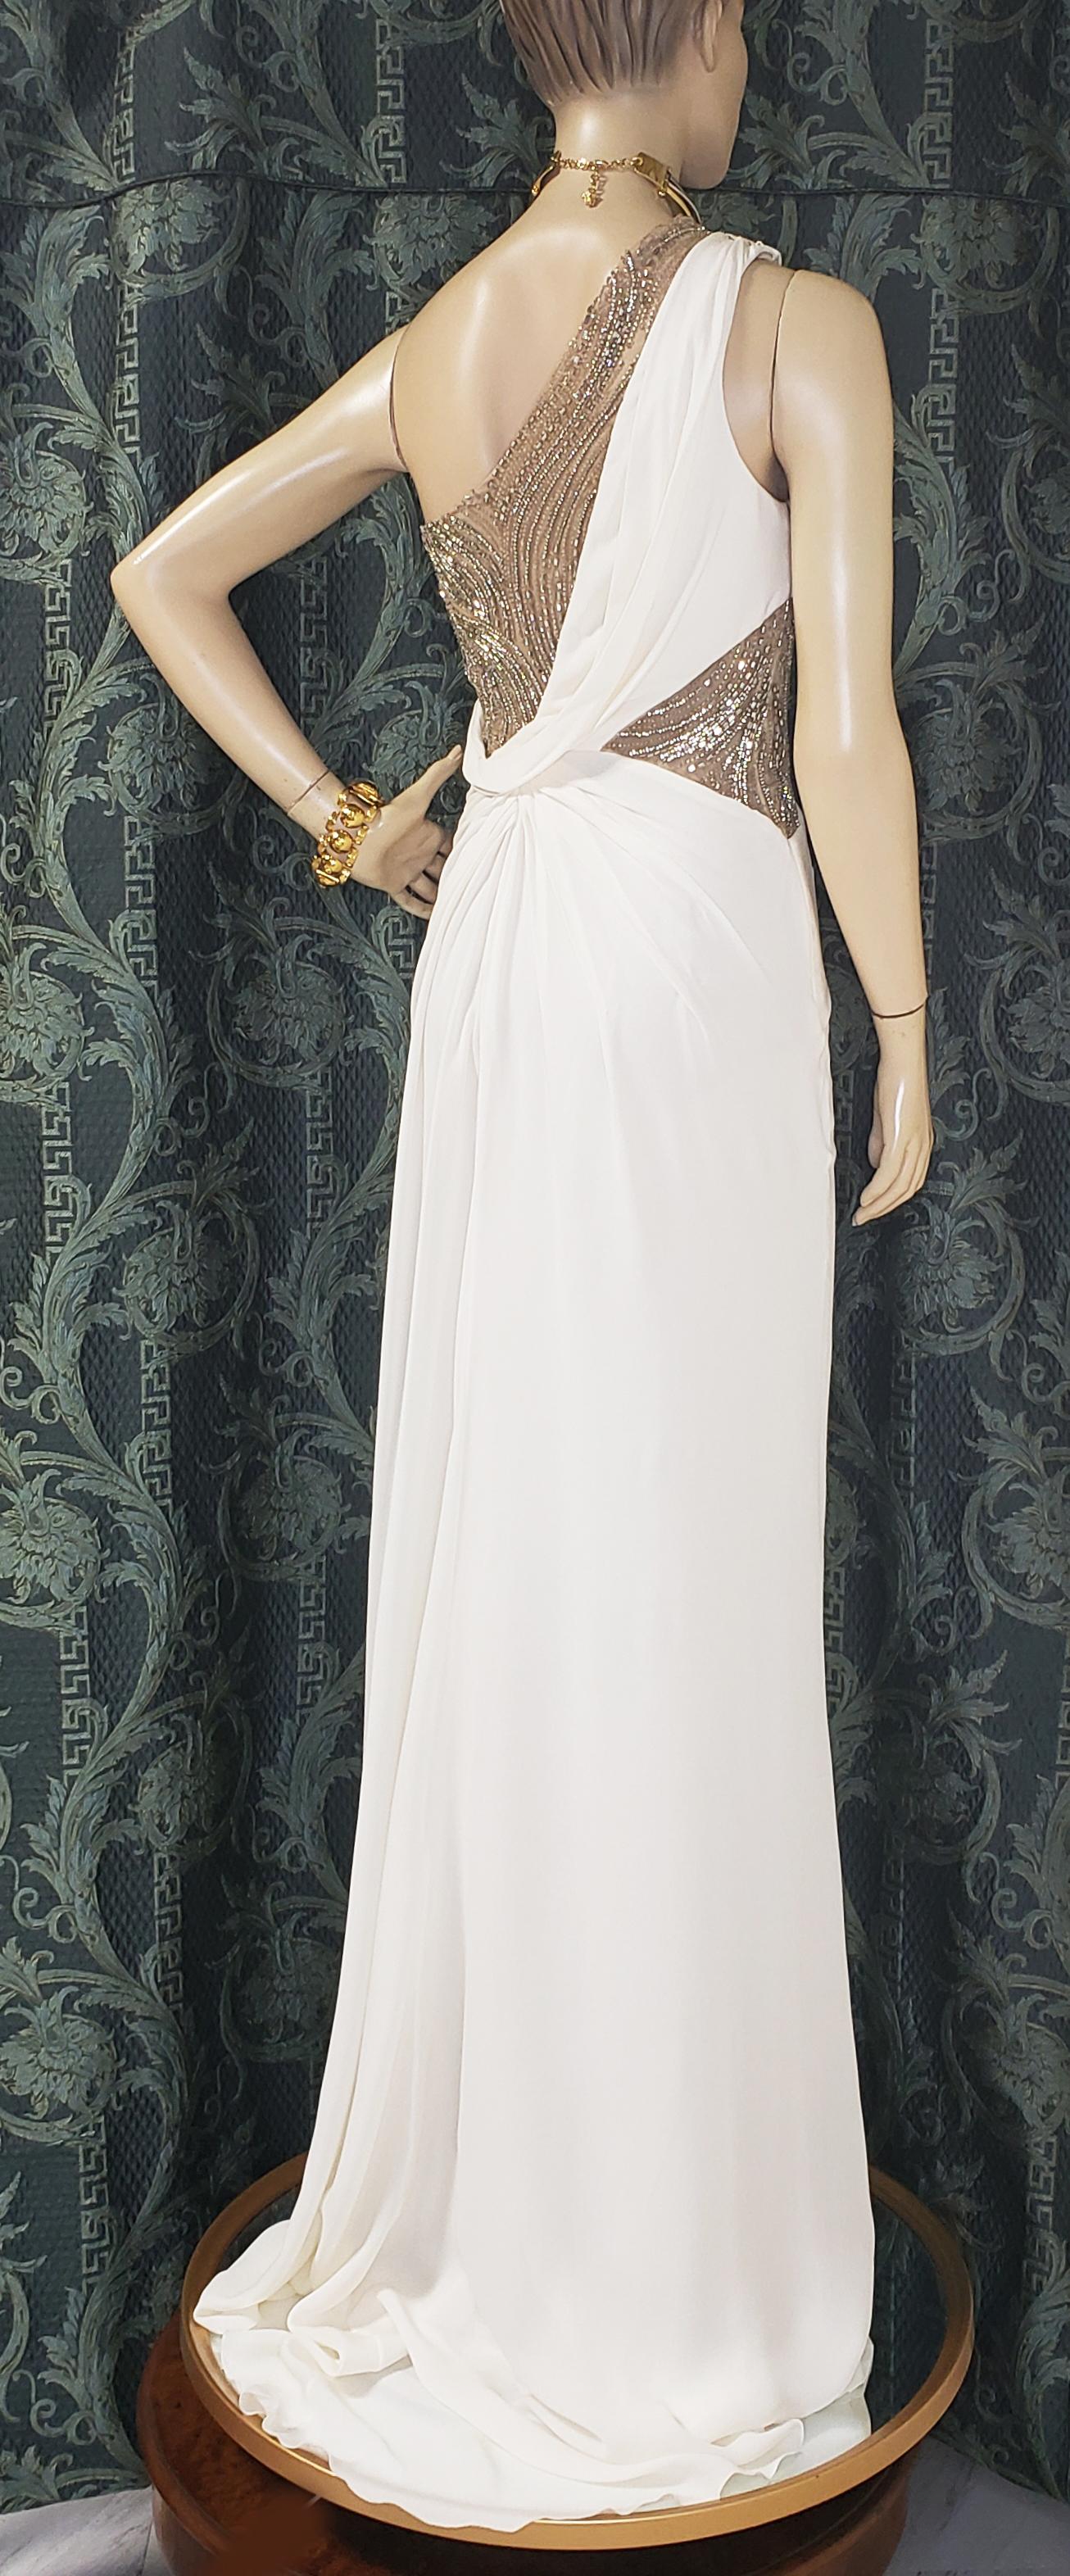 VERSACE CRYSTAL EMBELLISHED WHITE SILK GOWN DRESS Sz IT 42 3